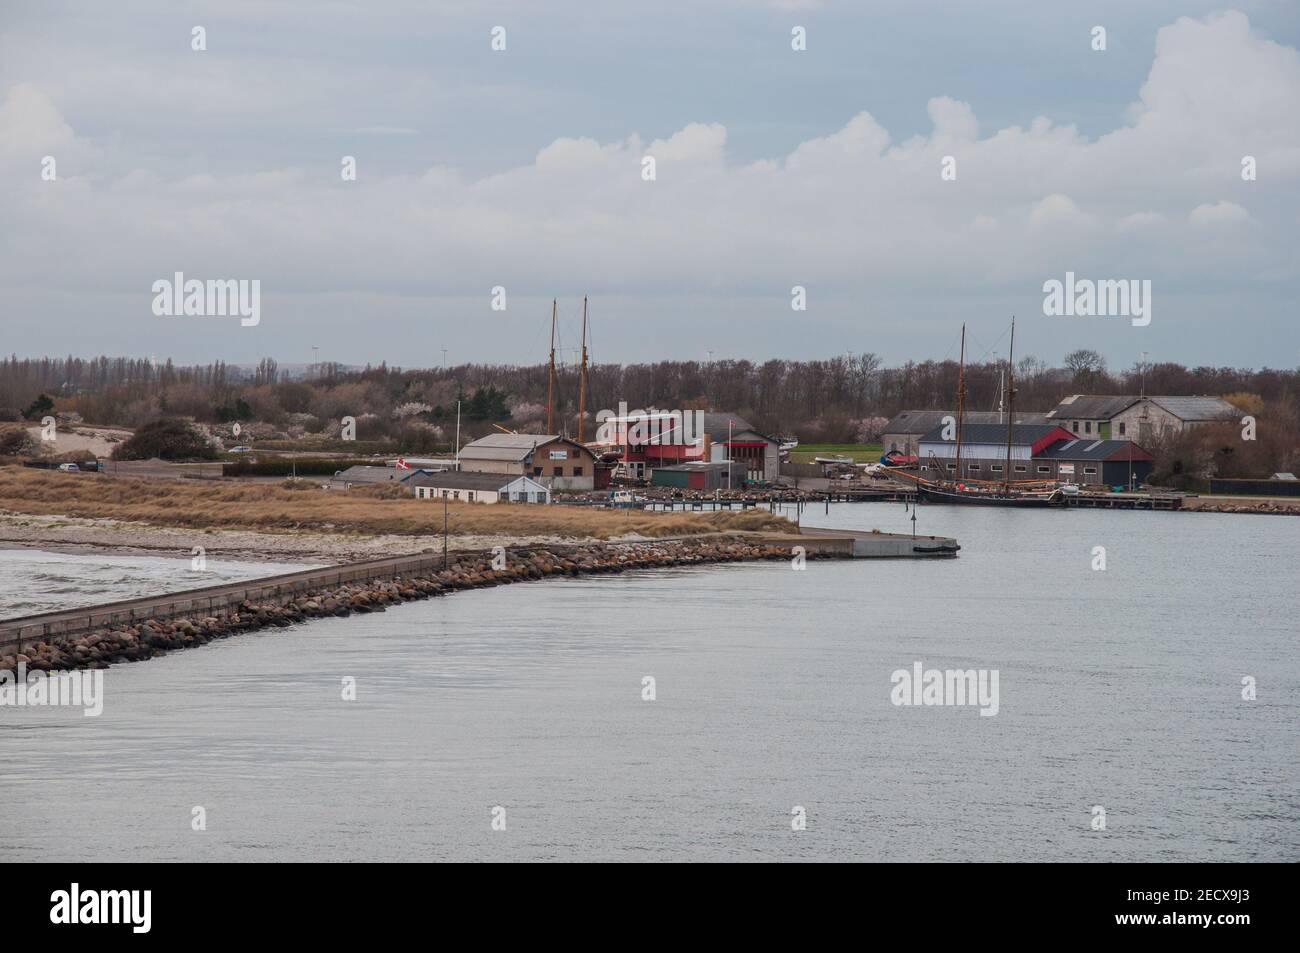 Rodbyhavn port and Boatyard in Danish countryside Stock Photo